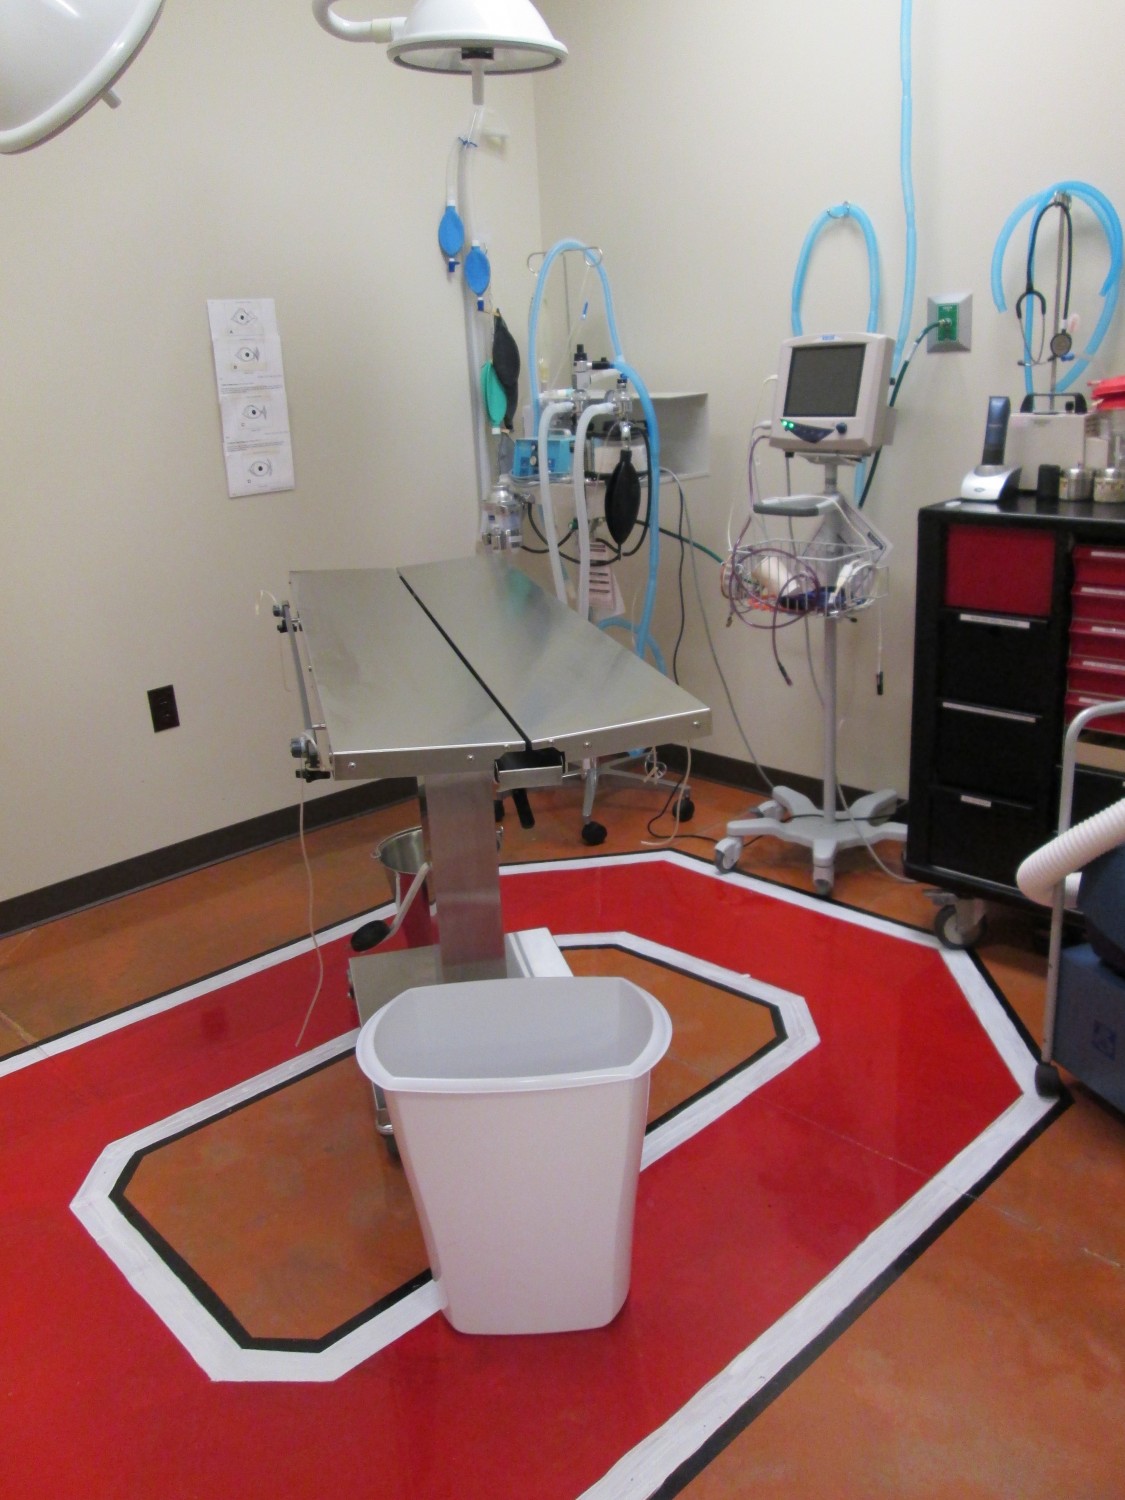 The Surgical Suite